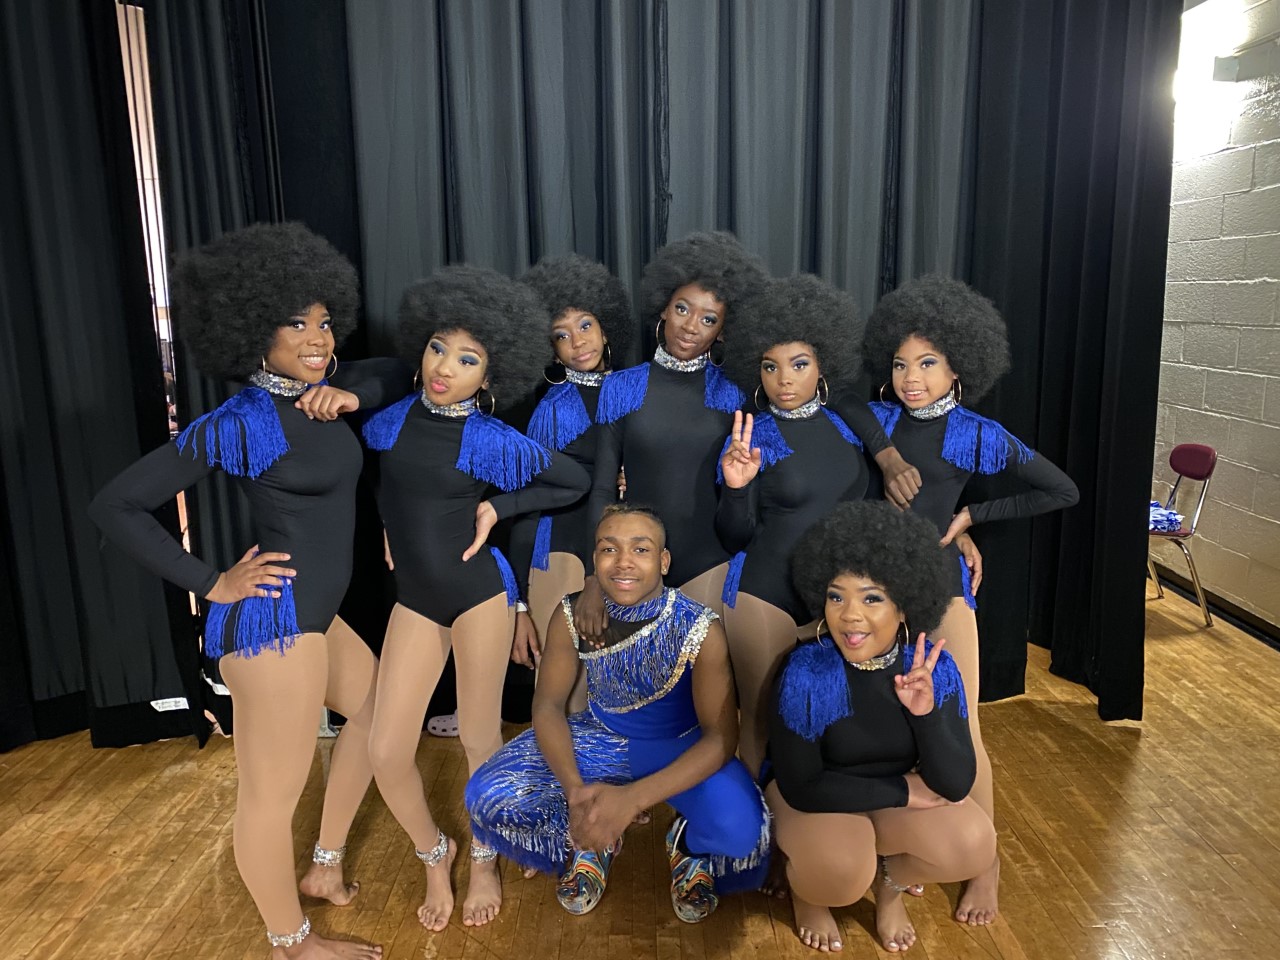 Keim and his dance team at basie beacon m.s. 72